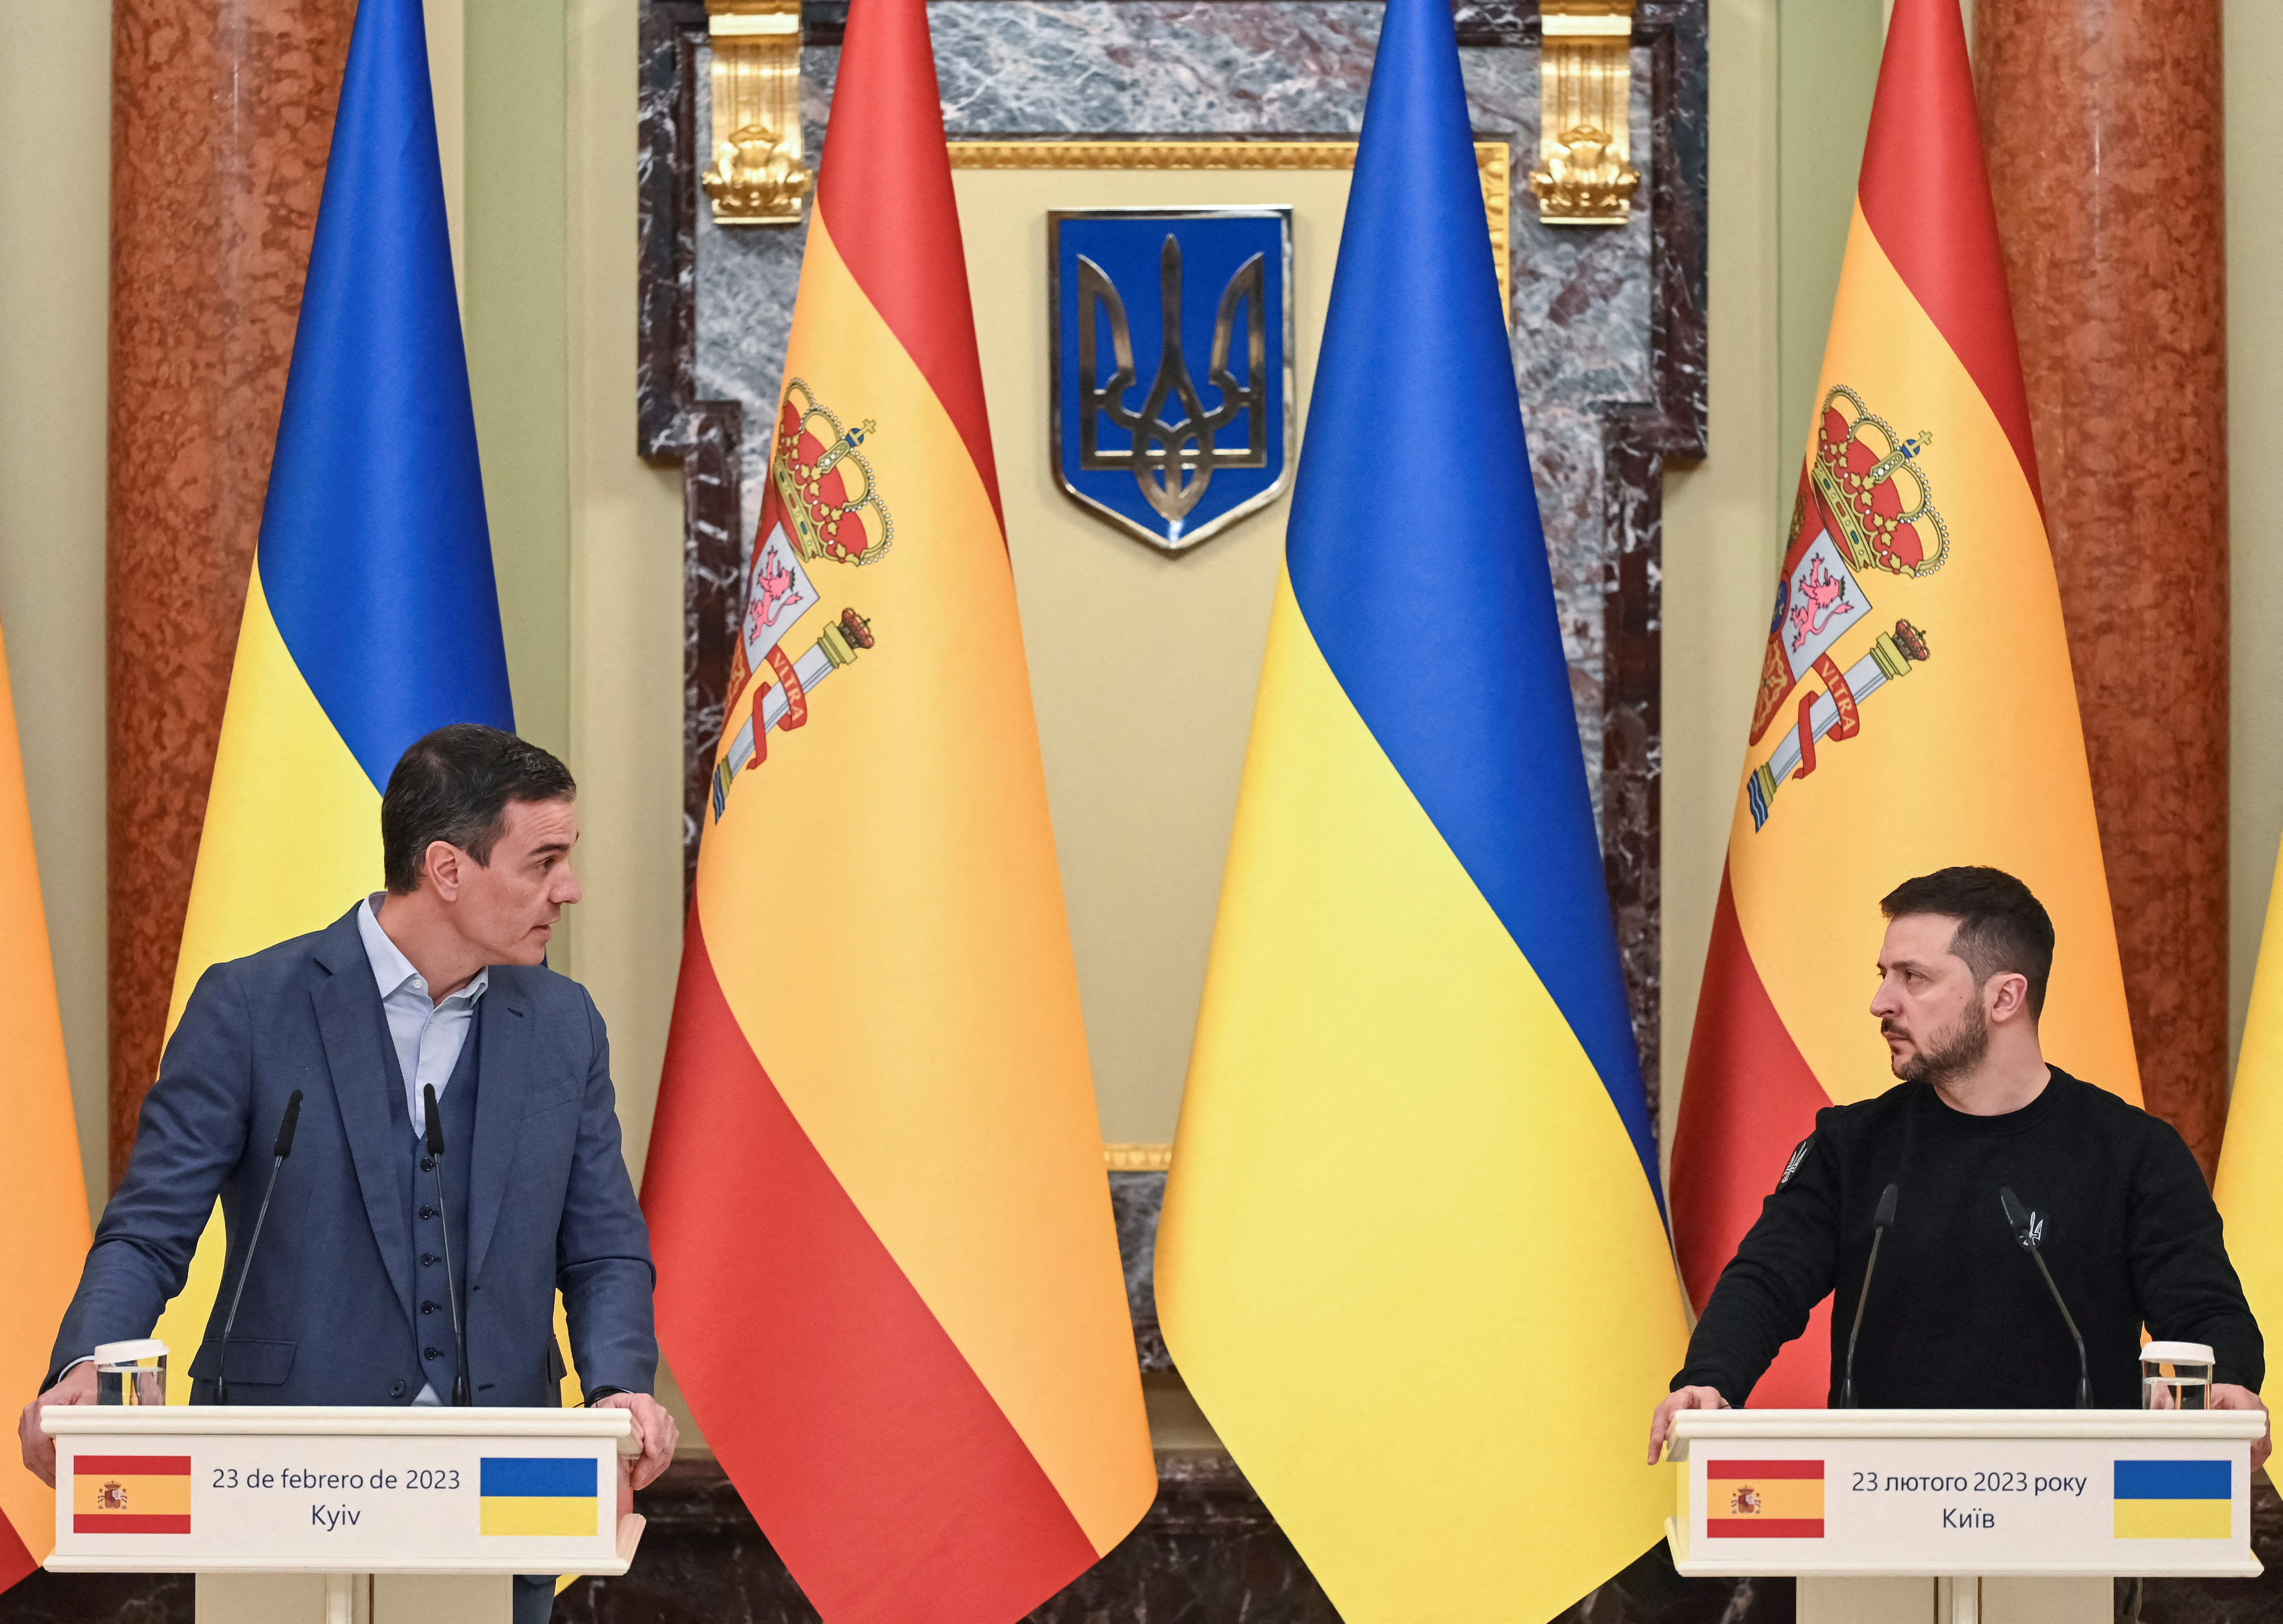 Ukraine's President Volodymyr Zelenskiy and Spain's Prime Minister Pedro Sanchez attend a joint news briefing